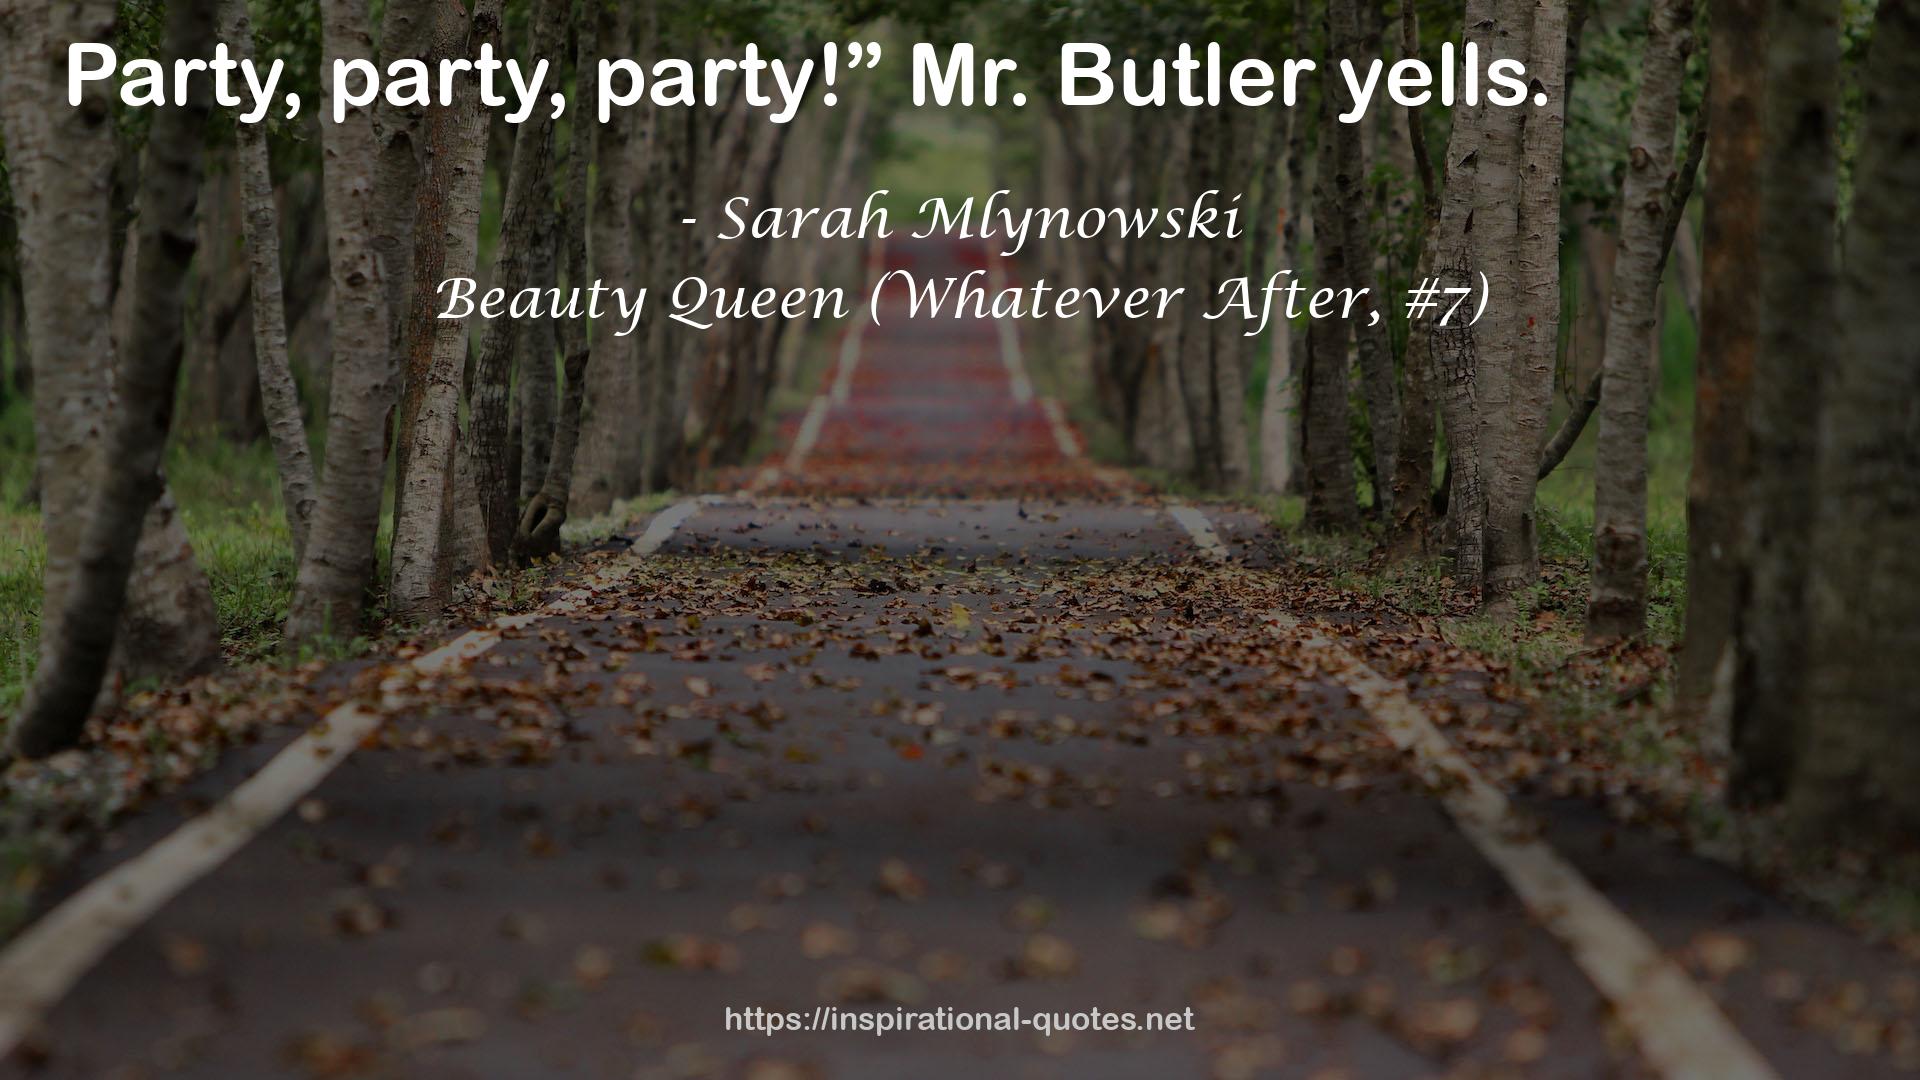 Beauty Queen (Whatever After, #7) QUOTES